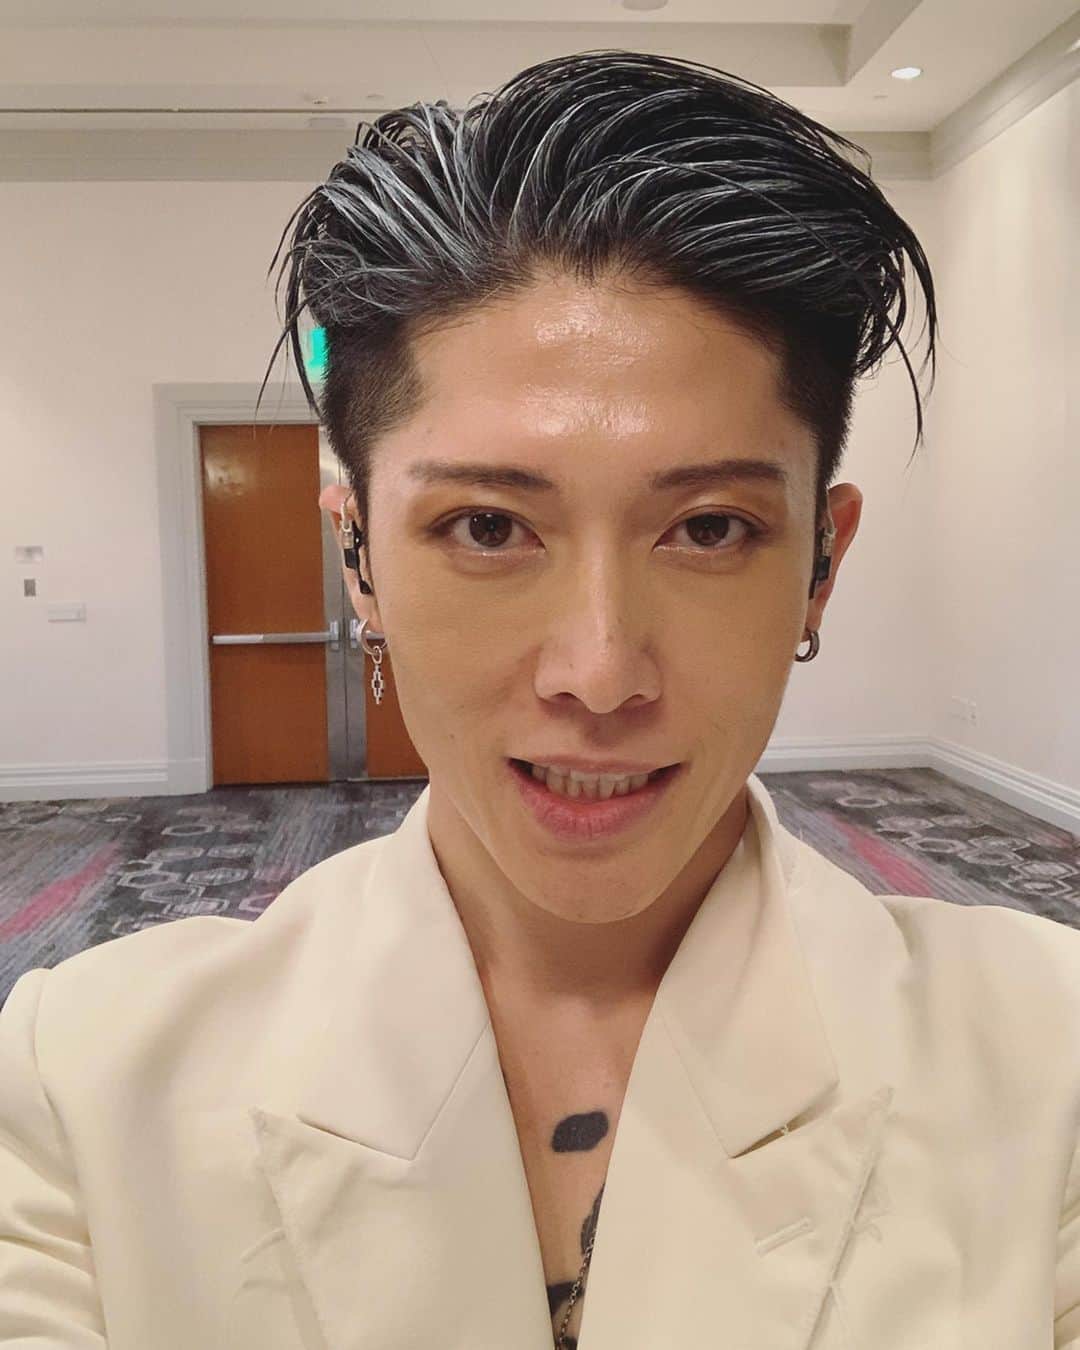 雅-MIYAVI-さんのインスタグラム写真 - (雅-MIYAVI-Instagram)「Successfully wrapped up the bullet trip to LA in the mid of the ASIA tour ✈️ What a pleasure to perform at such an important event with people who make a strong bridge between the U.S. and Japan. Thank you so much for inviting us @usjapancouncil and Mrs.Kaifu from @japanhousela who contacted me to offer us a moment to play at this event. Also, big appreciation to @americanair Japan & US team. You guys made this trip really happen and it went freakin smooth just like silk. Srsly, without your support, I would’ve fallen asleep onstage. LOL (Arrived at the hotel at 2PM and hit the stage at 6PM 😵) Really proud of being an ambassador of your team. Thank you, I’ll do my best!!!! 💪🏻And of course the MIYAVI US tour crew @miyavi_staff did an amazing job onstage as always. Was also such a great reunion after the EU tour! Deeply hope the relationship between the U.S. and Japan develops even stronger, bonds tight and proceeds to do lots of great things for the entire world with some of the leading countries. 🙏🏻🌎🌏🌍 Thank you. アジアツアーからのロサンゼルス弾丸ツアー、無事に遂行することができました！！日米の架け橋となる様々な方々が集まるこの場所で演奏することができ、光栄でした。お声がけくださったジャパンハウス海部館長をはじめ、US-JAPAN Counsil チームのみなさん、ありがとうございました！！そして今回の旅を最高のものにしてくれた日米のアメリカン・エアラインチームにも感謝します。(あなたたちのサービスがなければ、ステージで寝ていたかもしれません！😂）もちろん、MIYAVI US クルーも頑張ってくれました。いつもありがとう！僕たちのパフォーマンスがこれからの日米交流の発展に少しでも貢献できたなら幸いです。🙌🏻🙌🏻😃🇺🇸🤝🇯🇵 #USJCAC  #JapanHouse #AmeicanAirlines #アメリカン航空 #America #US #Japan #MIYAVI」11月8日 8時16分 - miyavi_ishihara